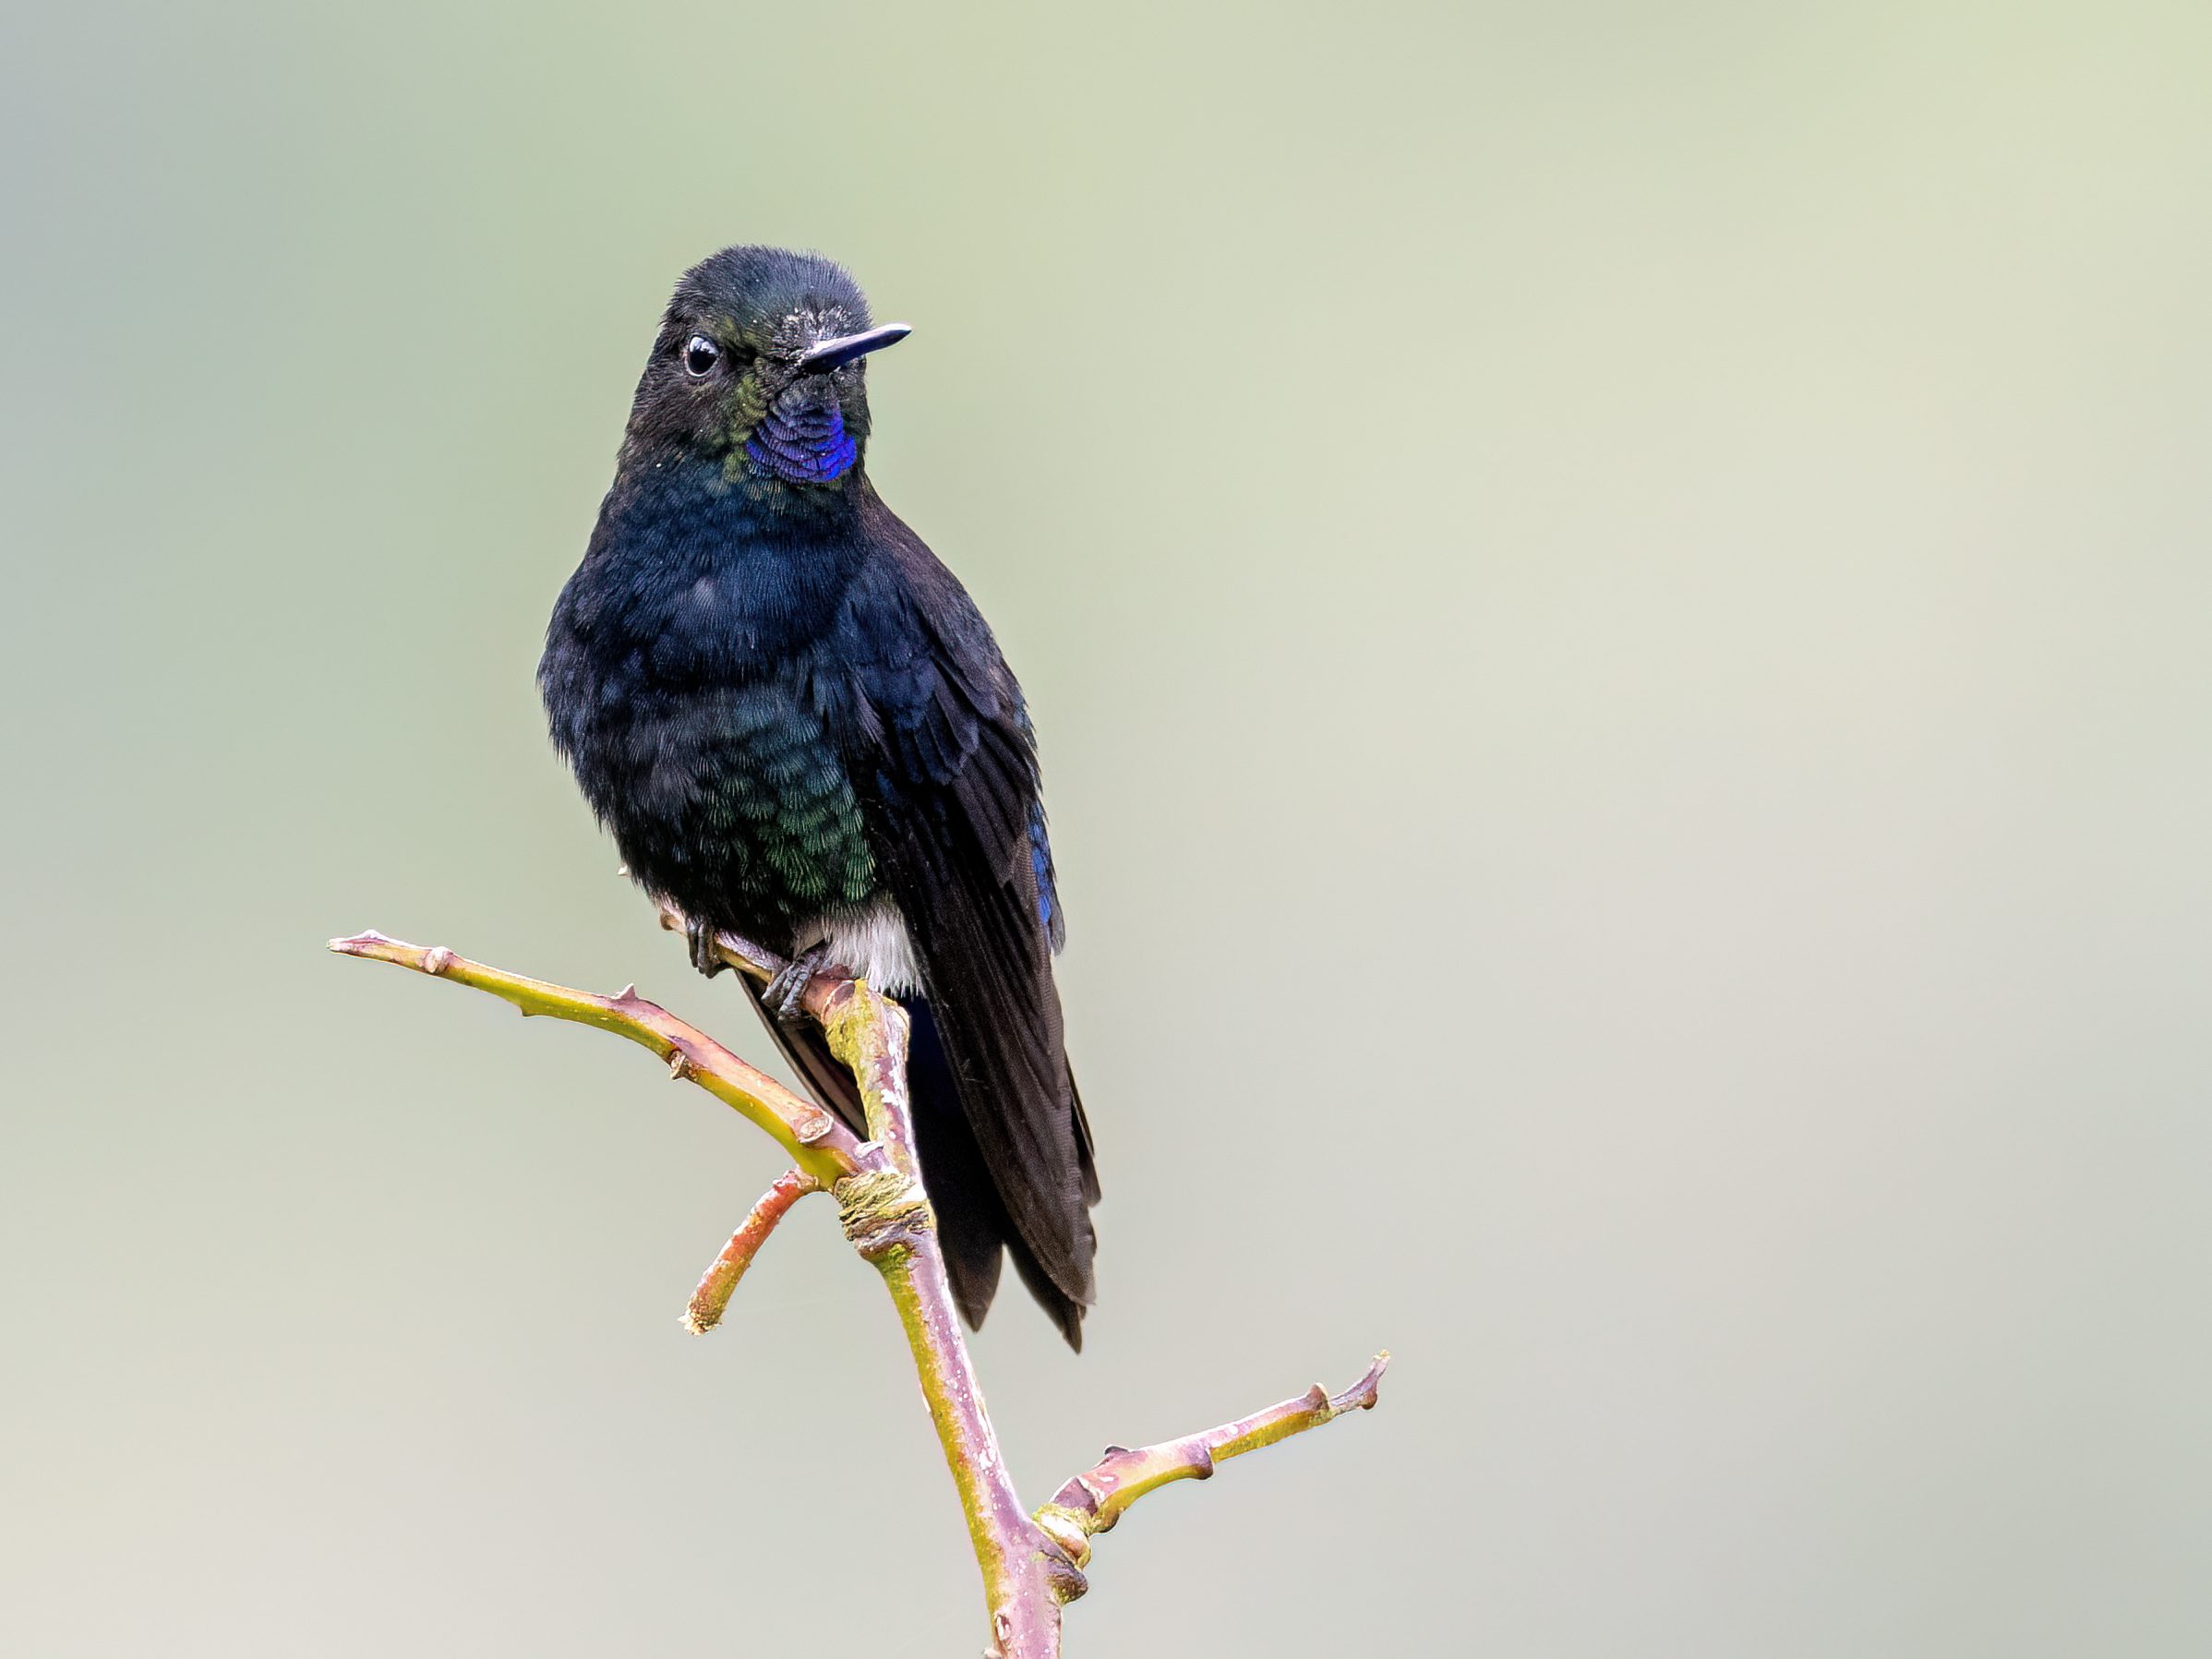 A dark hummingbird, with hints of green and blue stands on a plant.